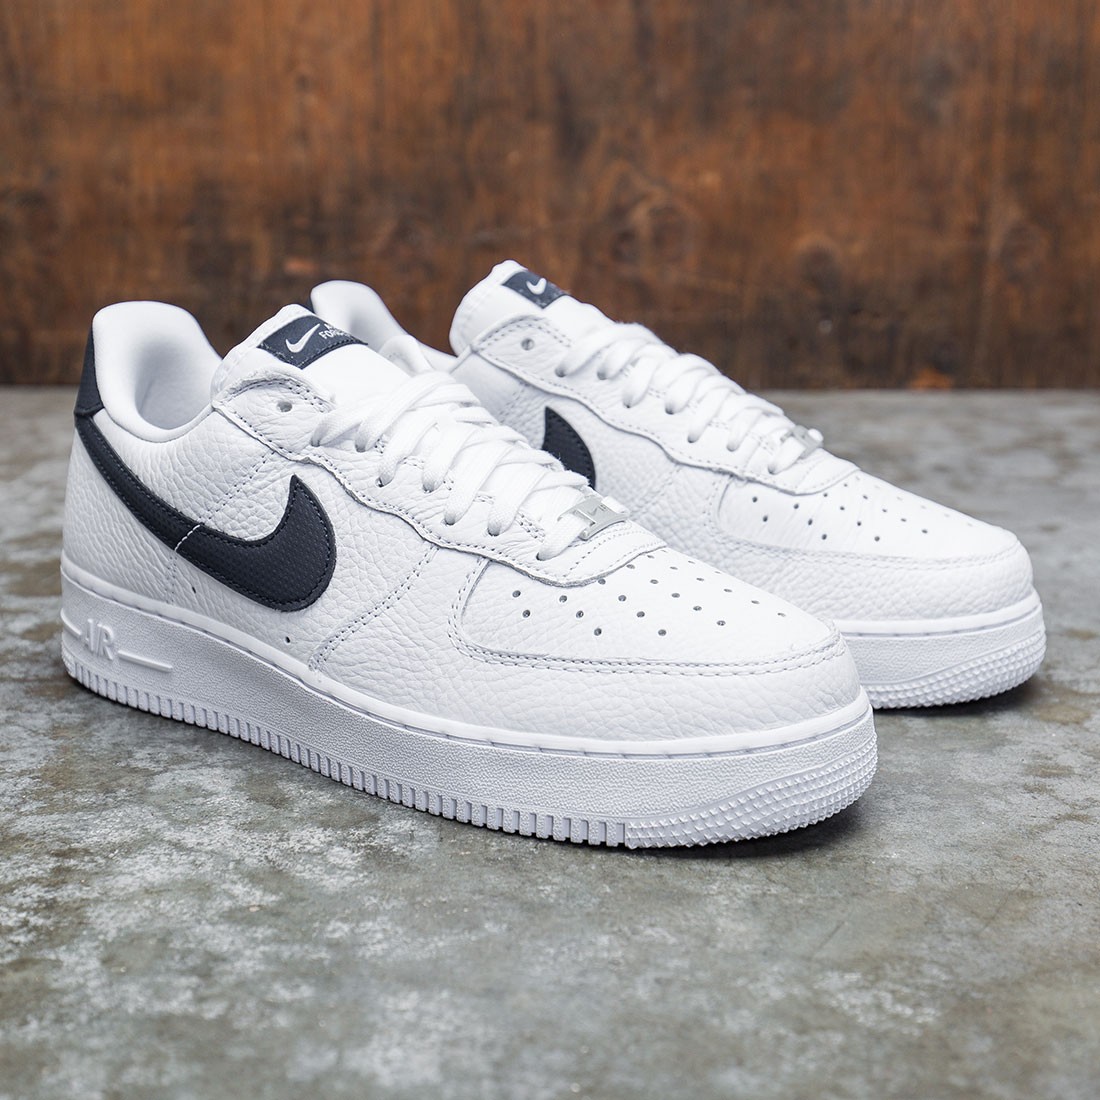 White low top air force ones